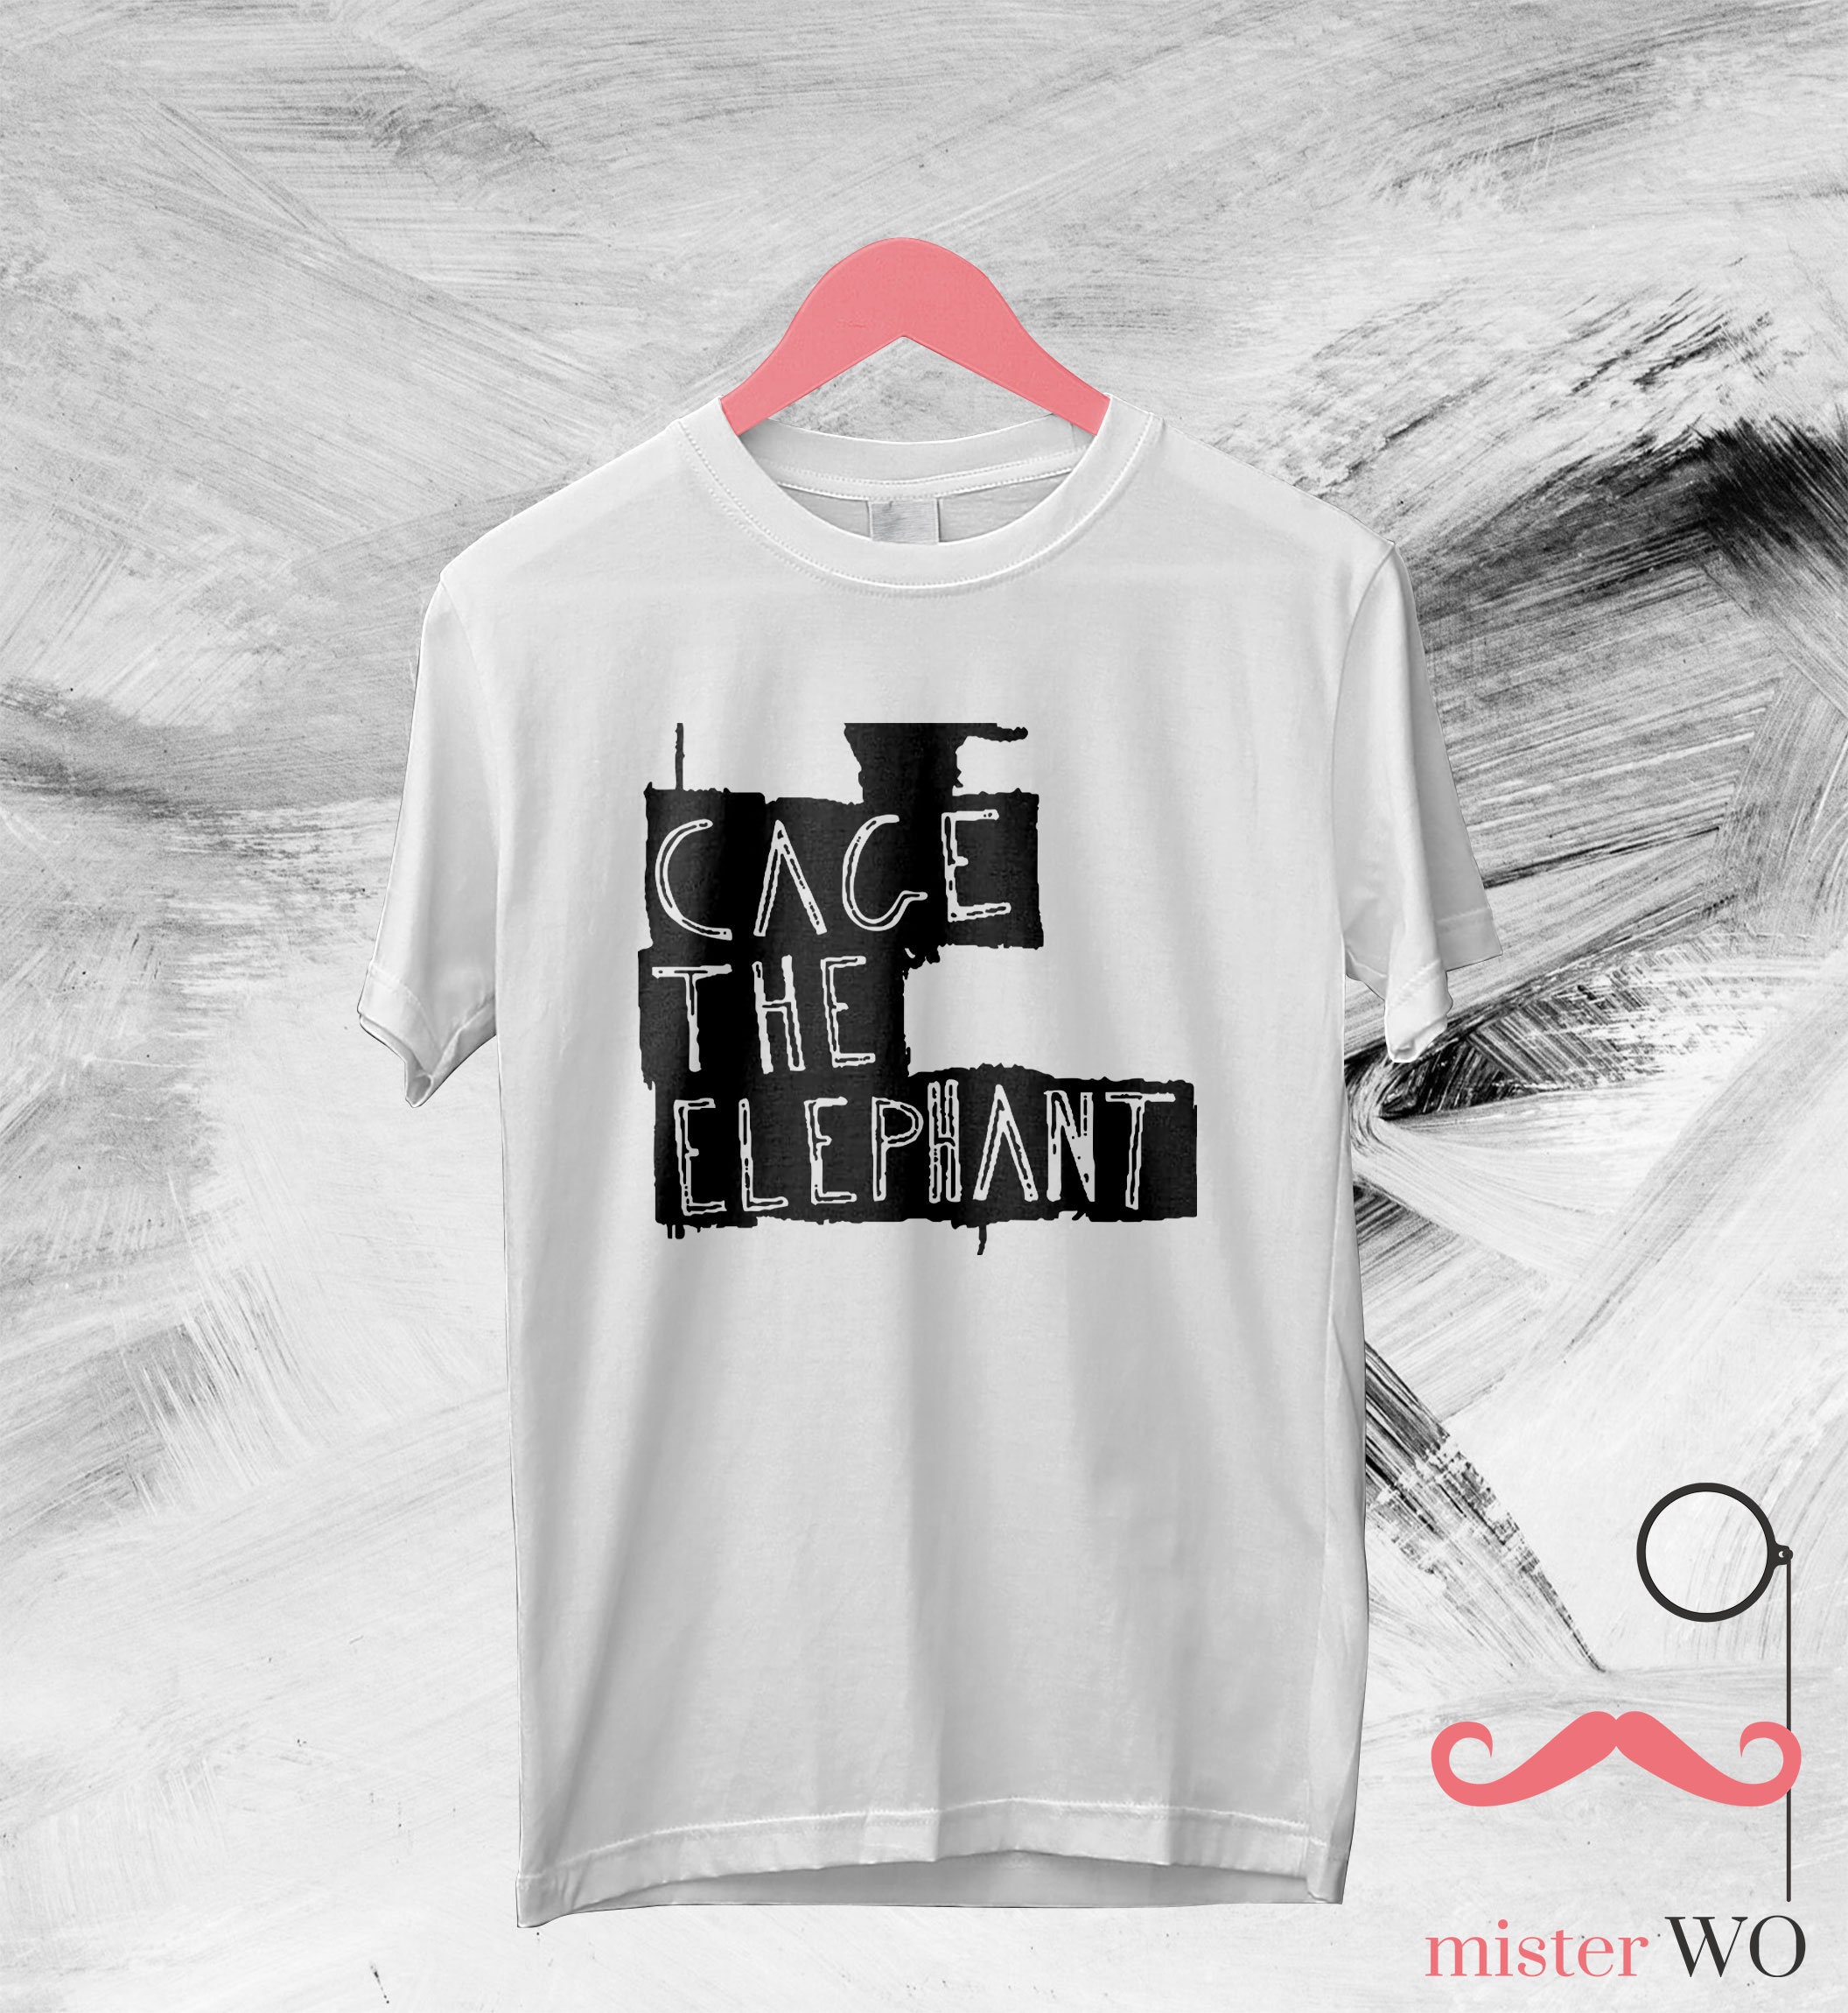 Discover Cage The Elephant Tour T-Shirt - Cage The Elephant Shirt, Cage The Elephant Tour, Alternative/Indie Music